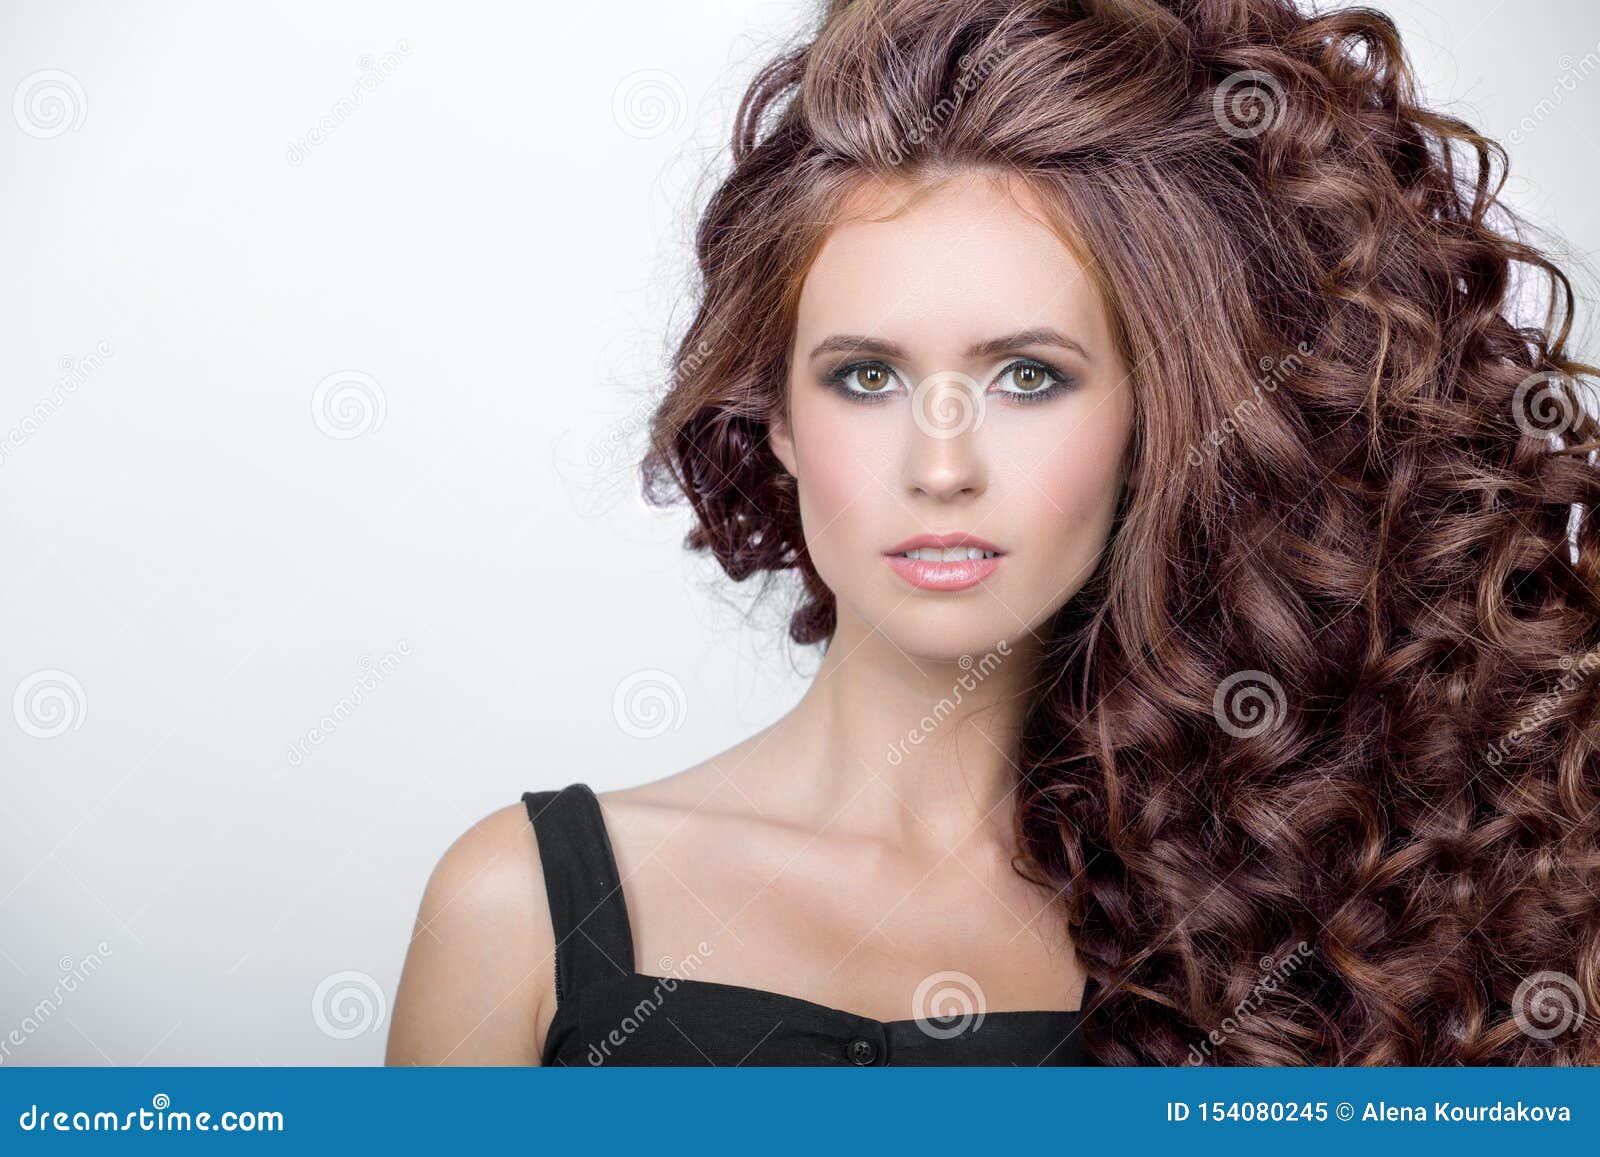 beautiful woman with curly brown thick hair. face closeup portrait